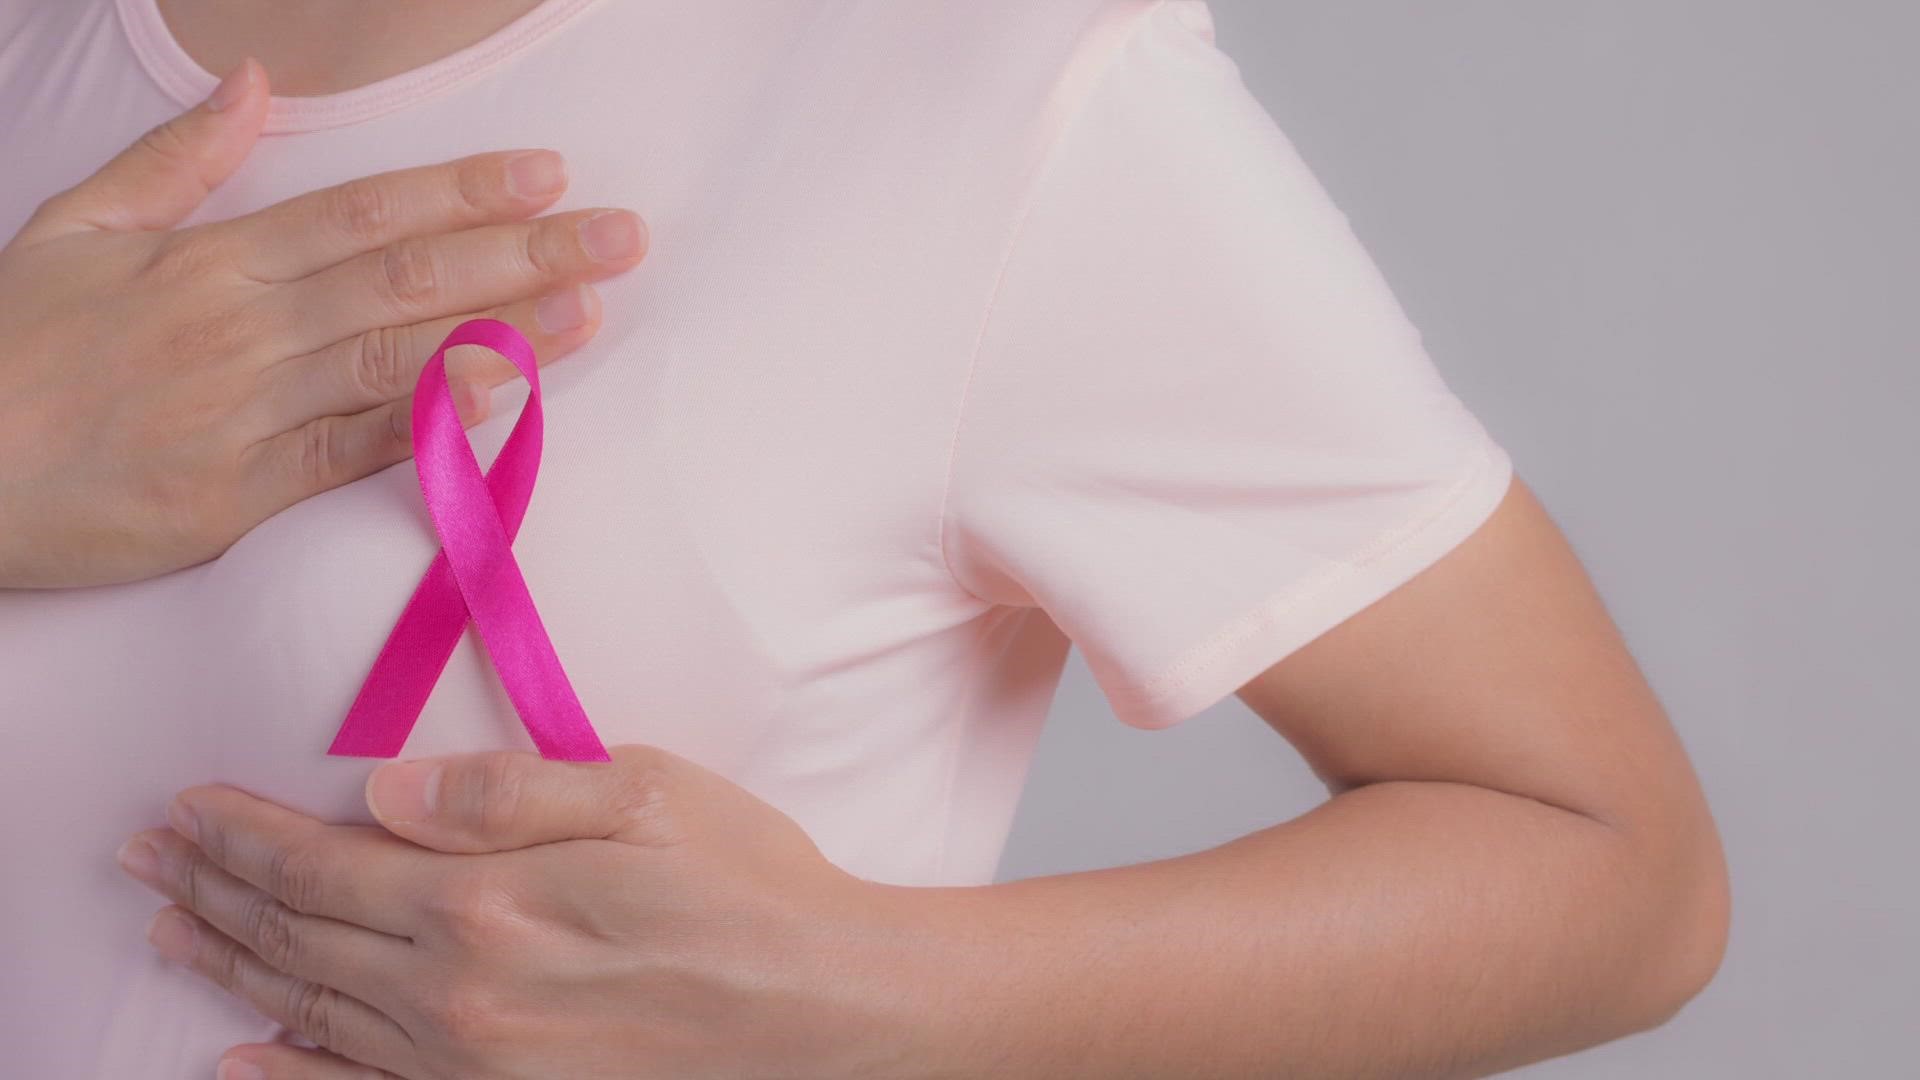 Every year in the U.S. about 264,000 women get breast cancer and 42,000 women die from the disease. Men can get the diagnosis, but its more rare.